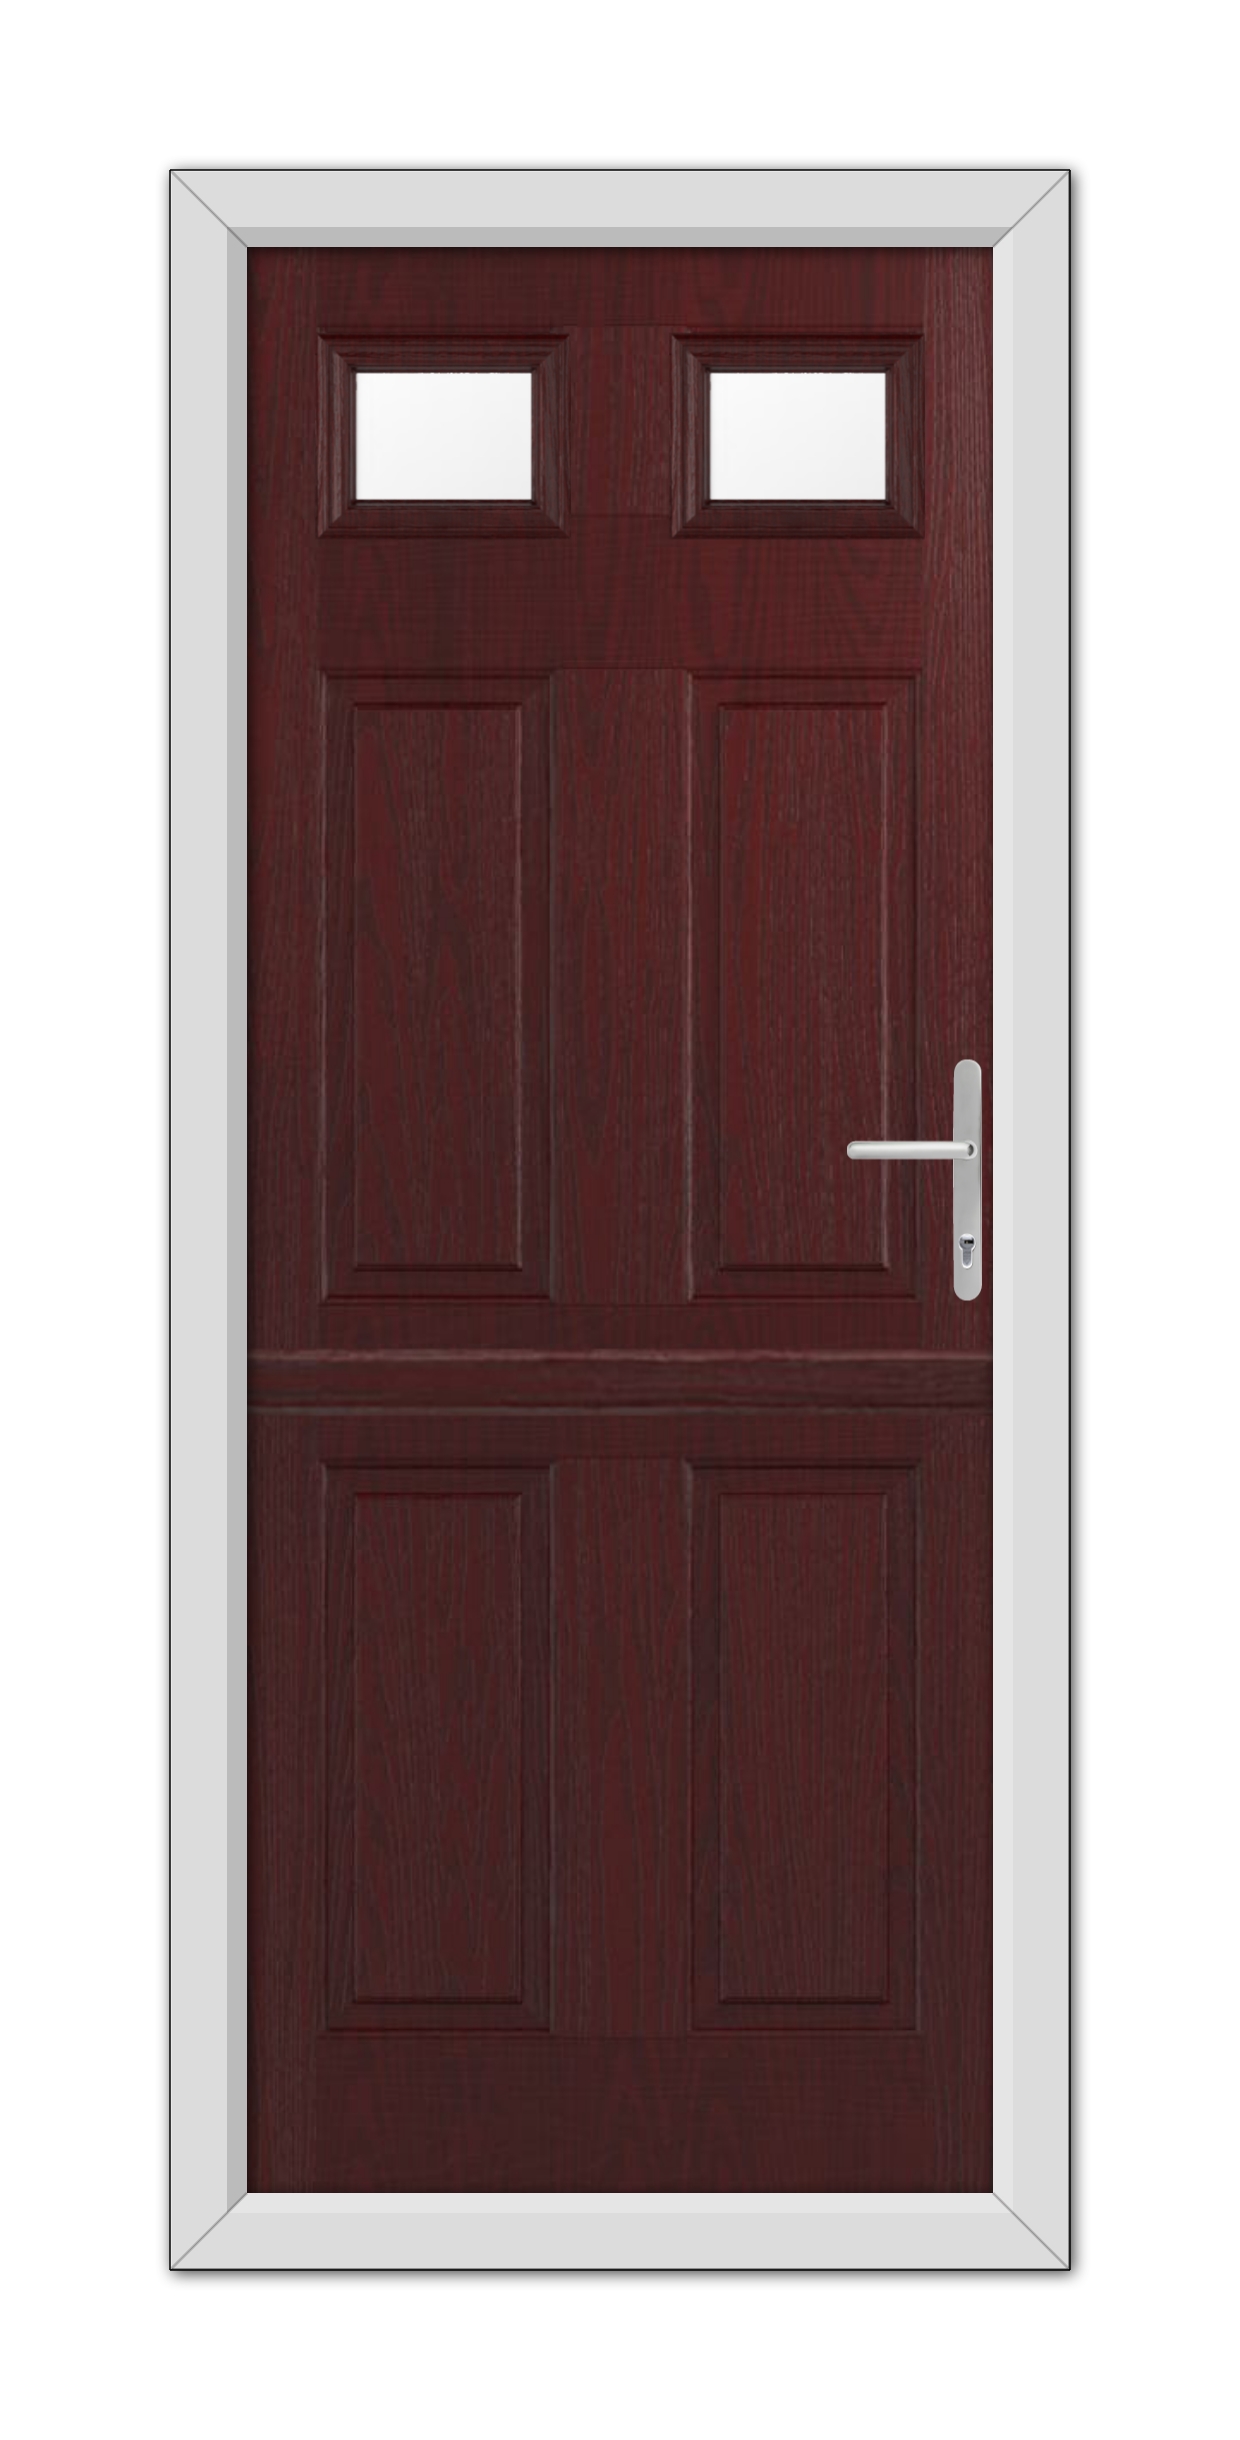 A Rosewood Middleton Glazed 2 Stable Composite Door 48mm Timber Core with two small square windows near the top, set in a white frame, featuring a silver handle on the right side.